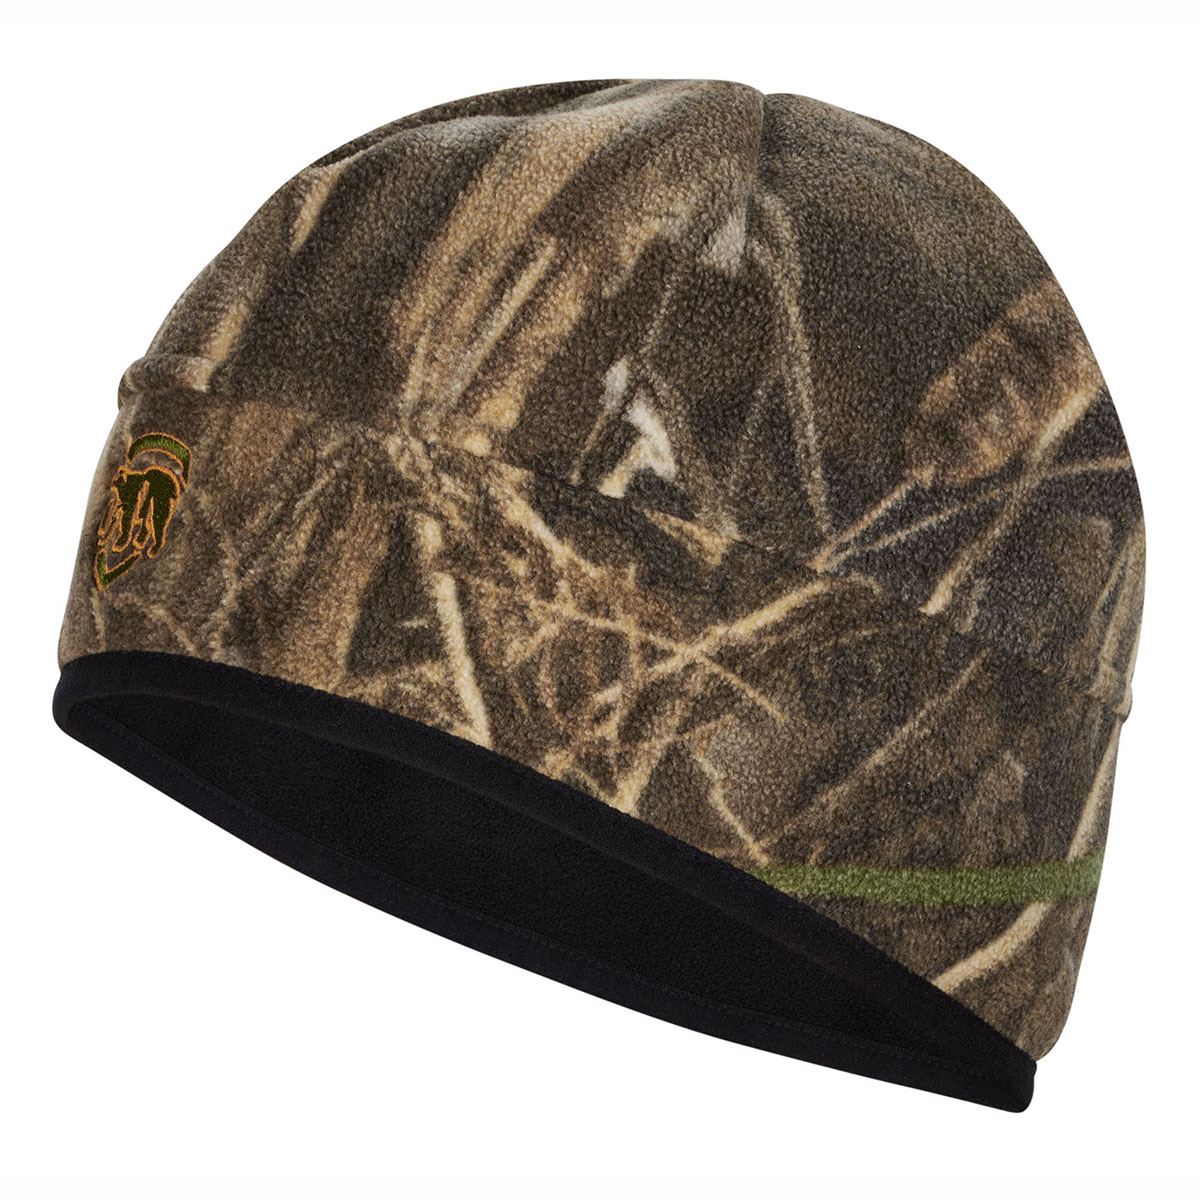 SHERPA FLEECE BEANIE - MAX-7® Hunting Collections ArcticShield Outerwear | and Systems REALTREE